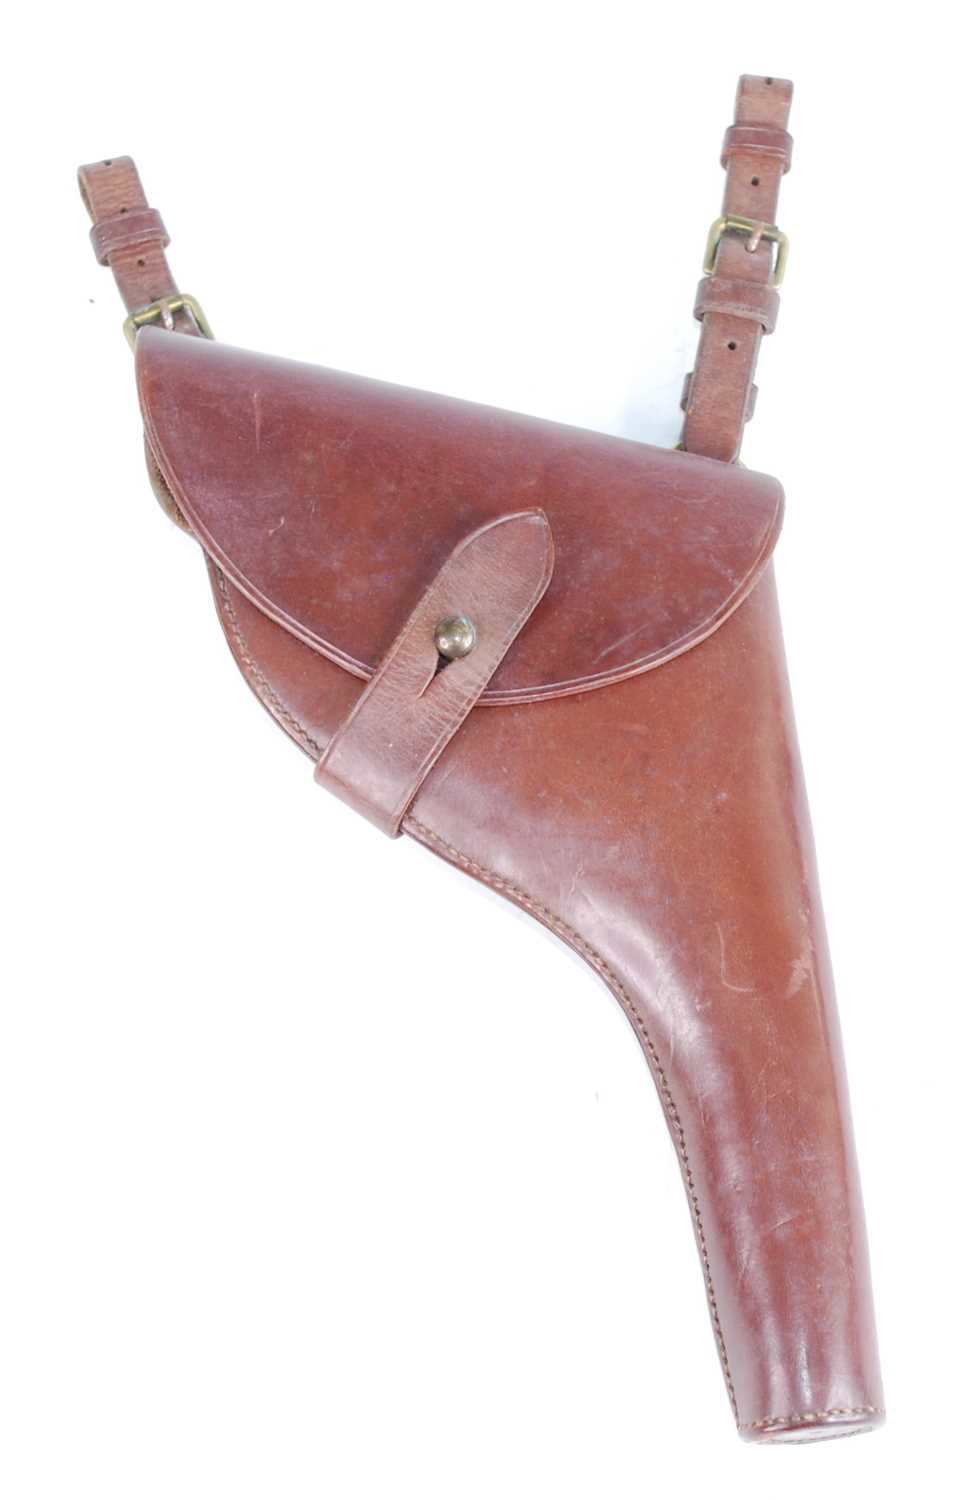 A Webley pattern brown leather holster, with belt straps.